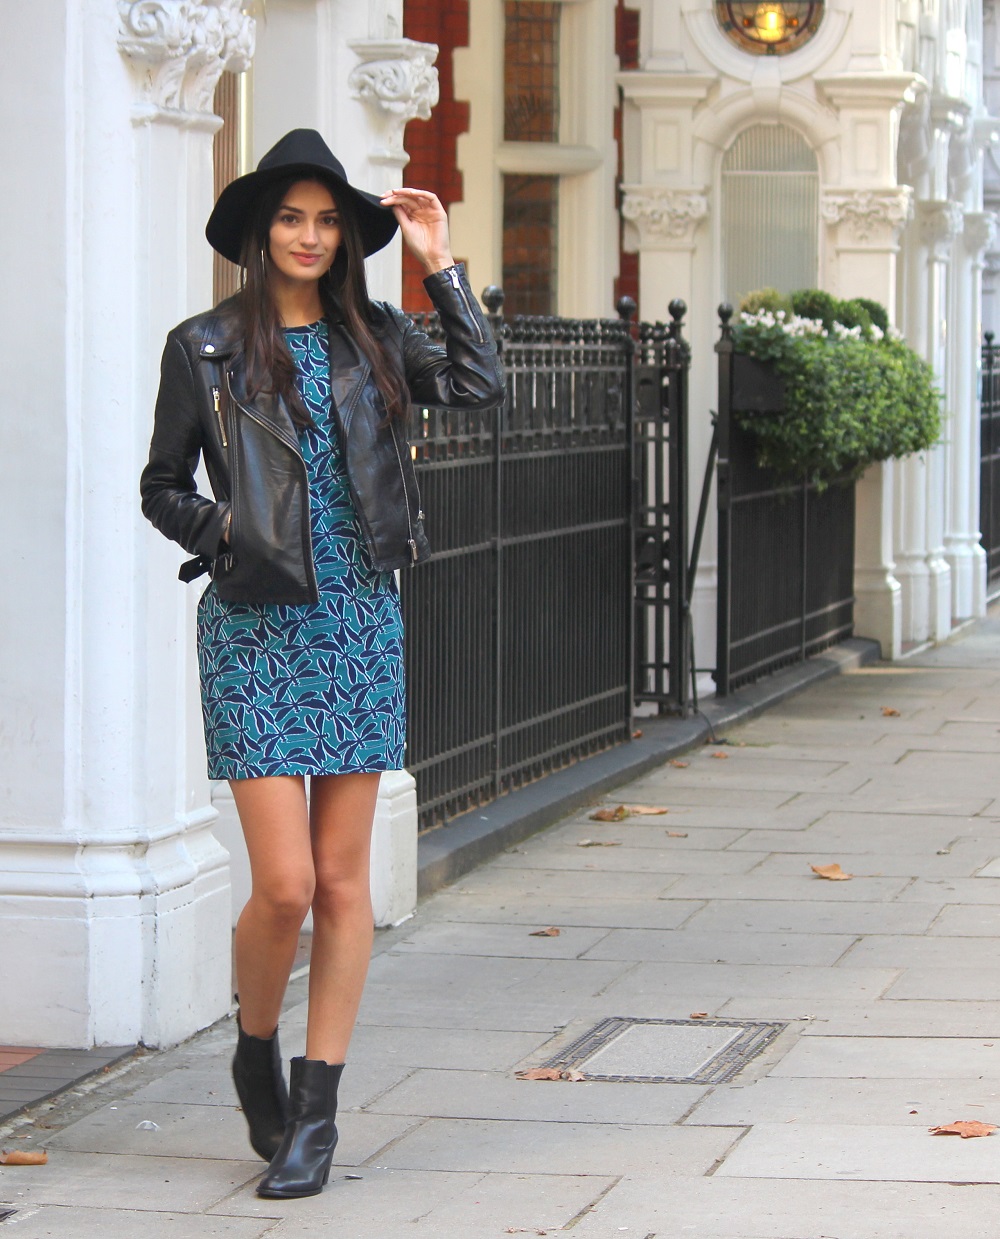 peexo fashion blogger wearing leather jacket and sugarhill boutique dress